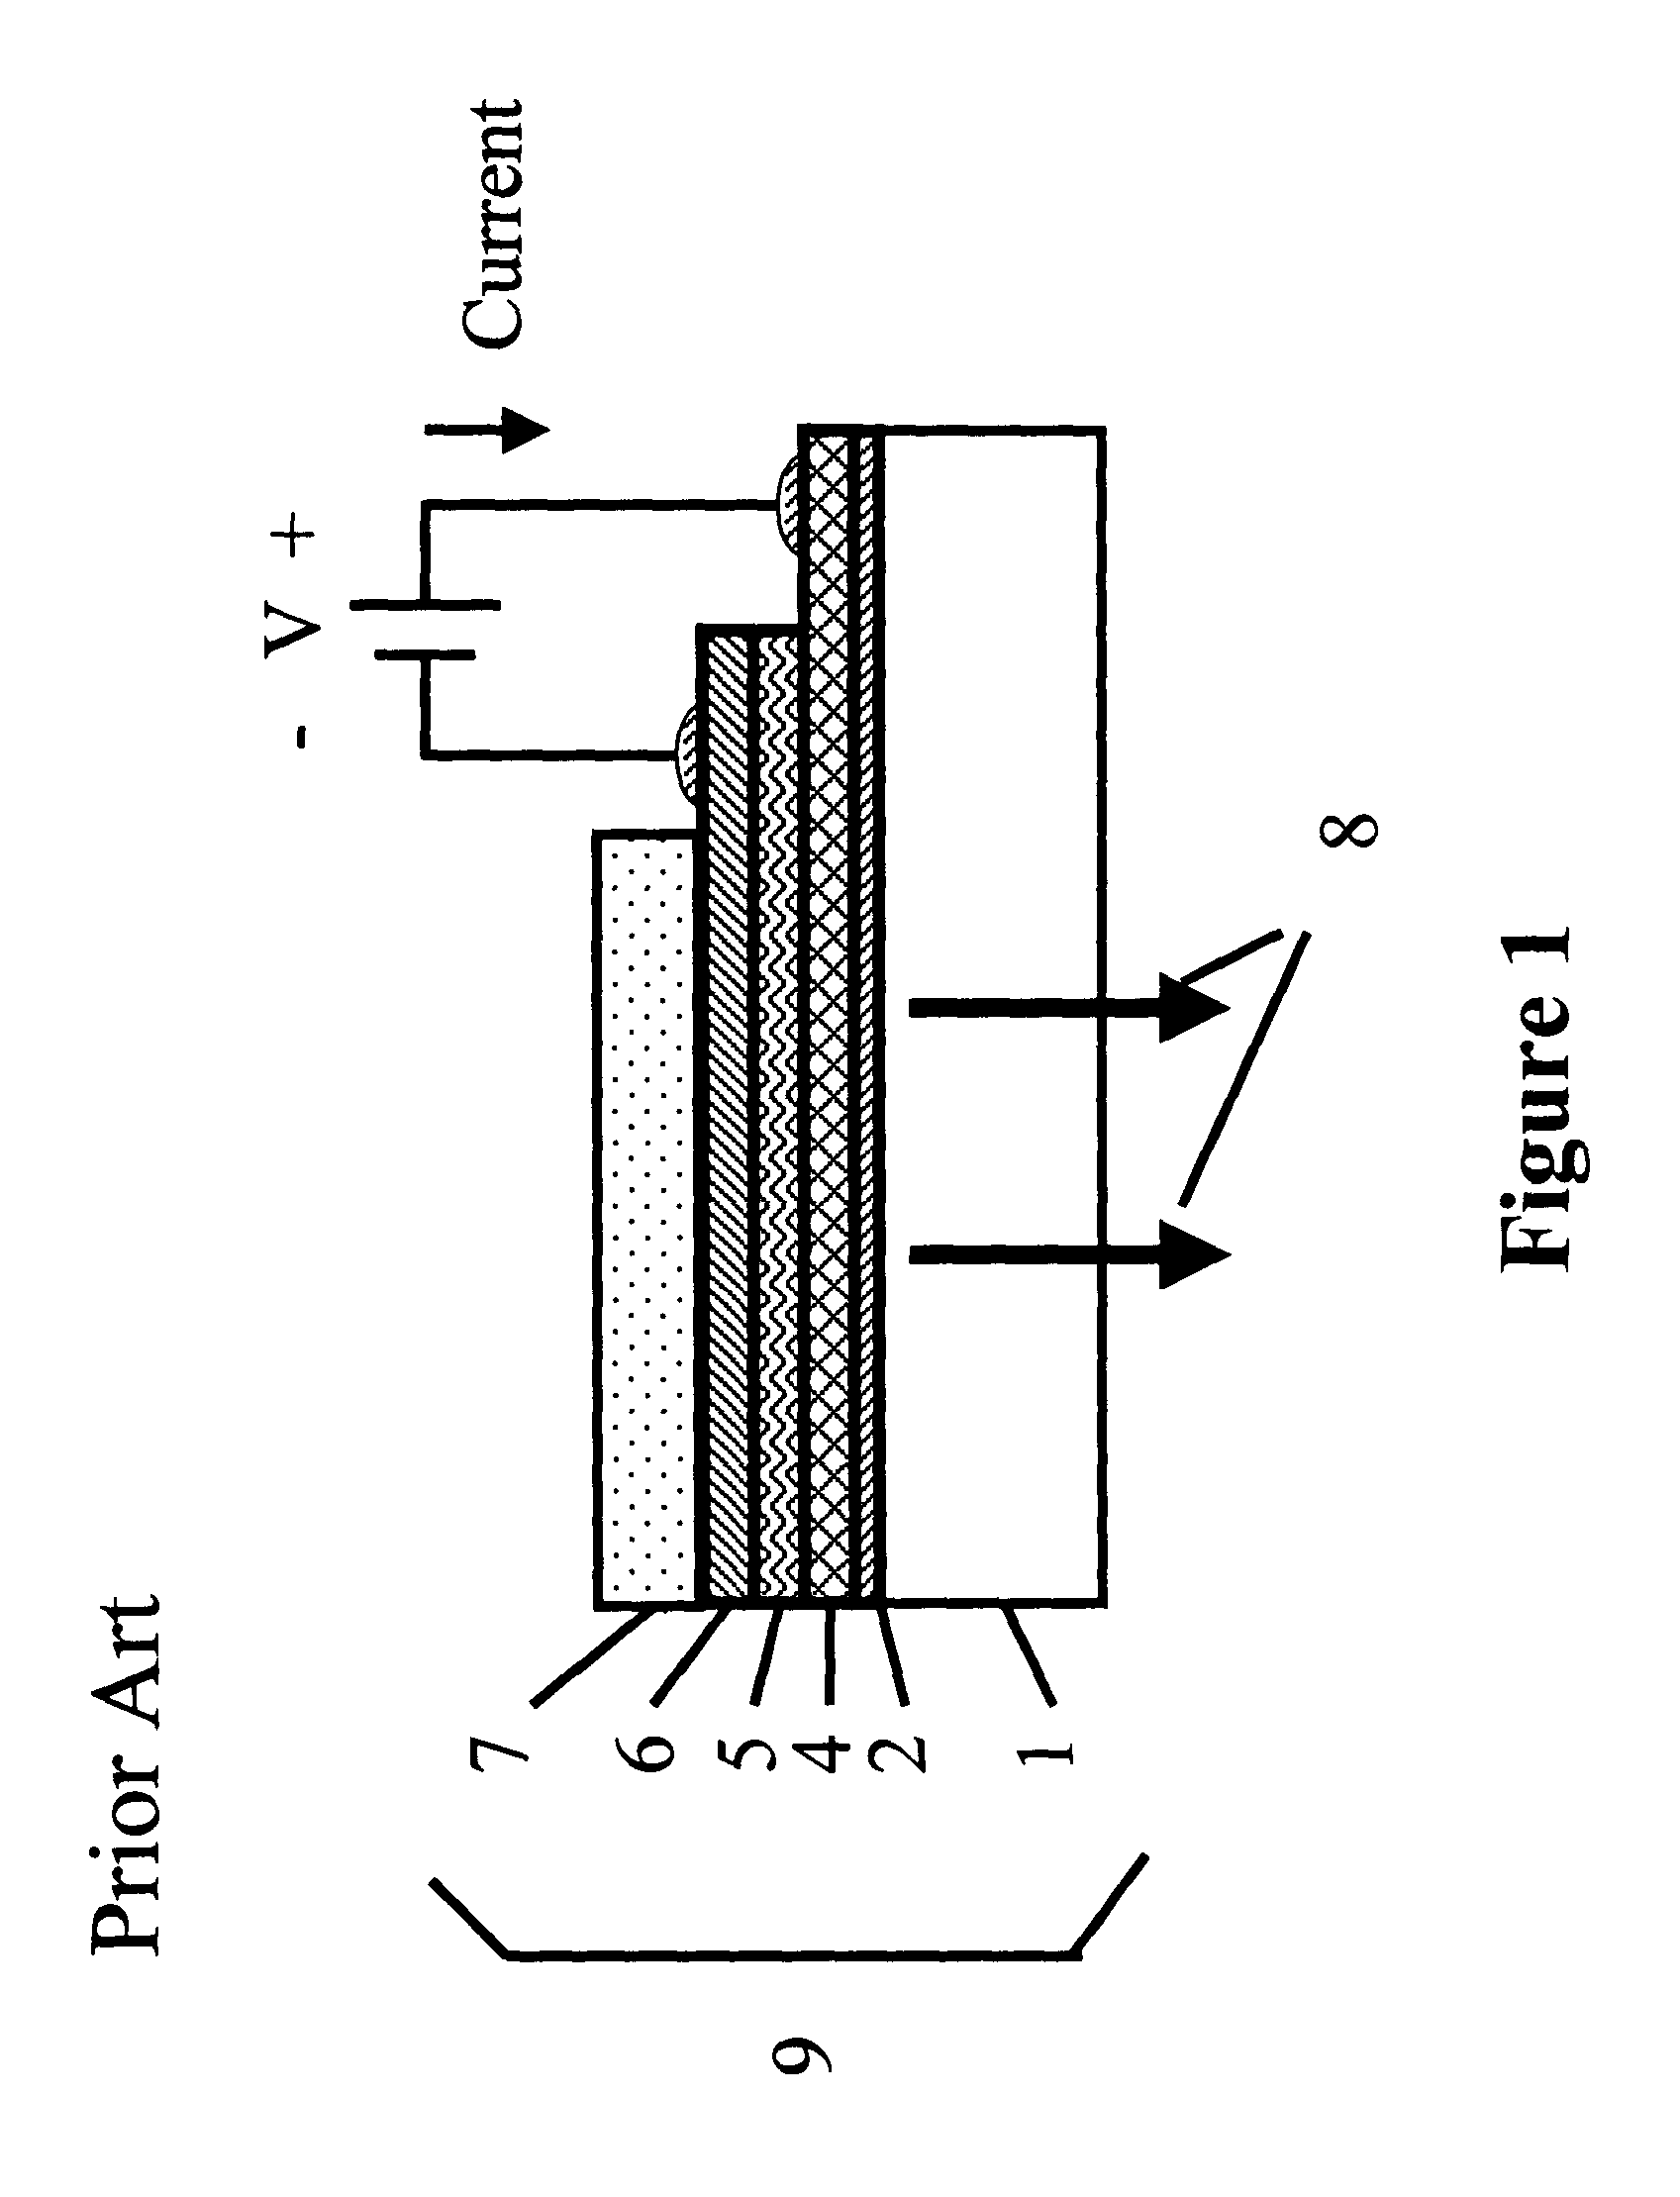 Organic semiconductor devices and methods of fabrication including forming two parts with polymerisable groups and bonding the parts